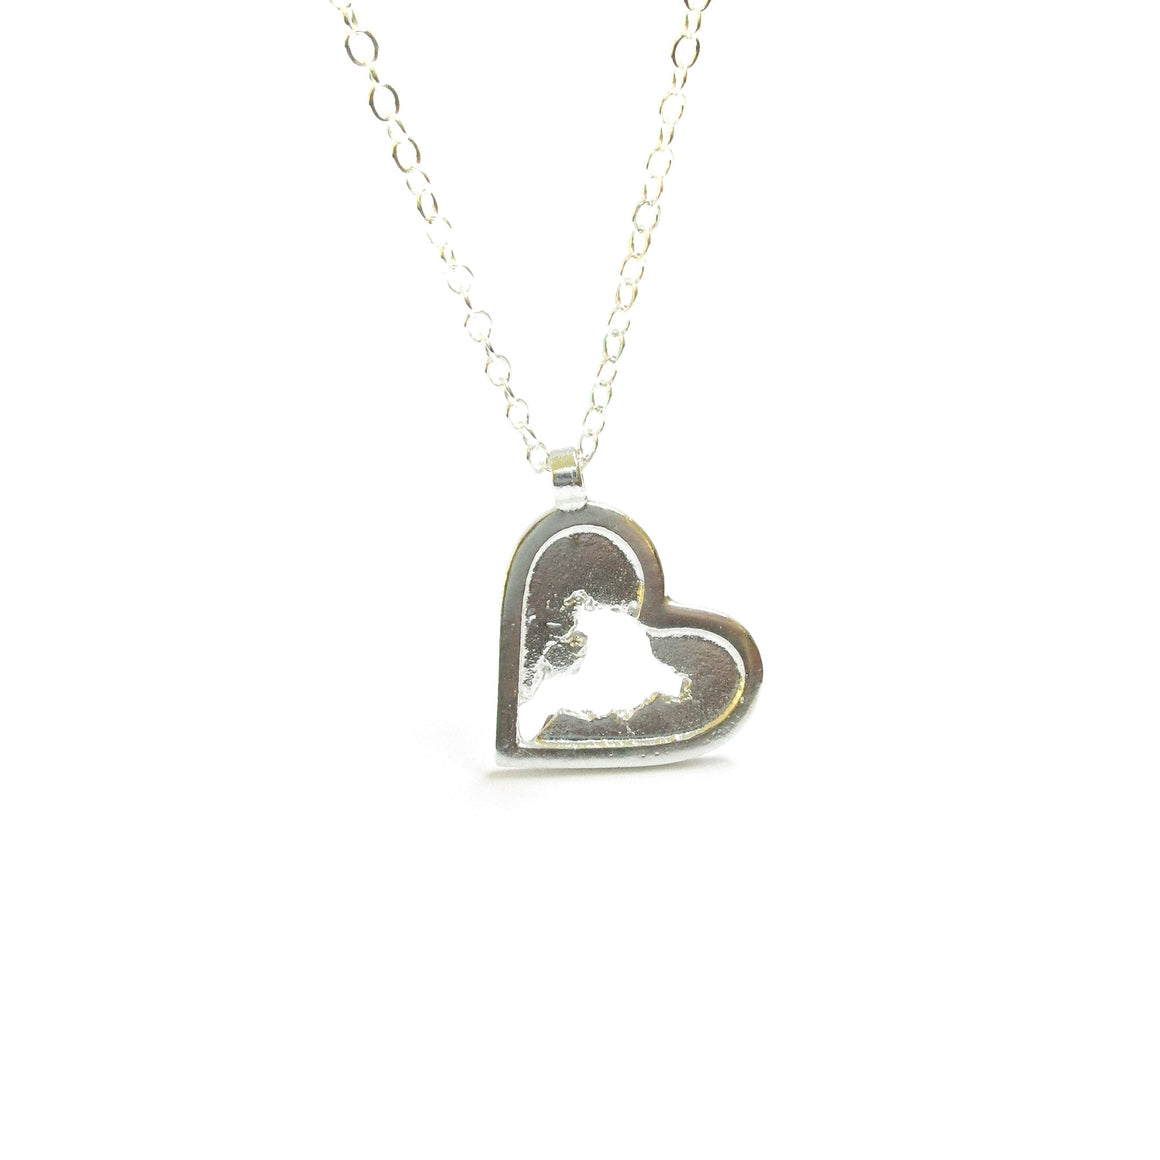 sterling silver heart pendant by Seth Papac